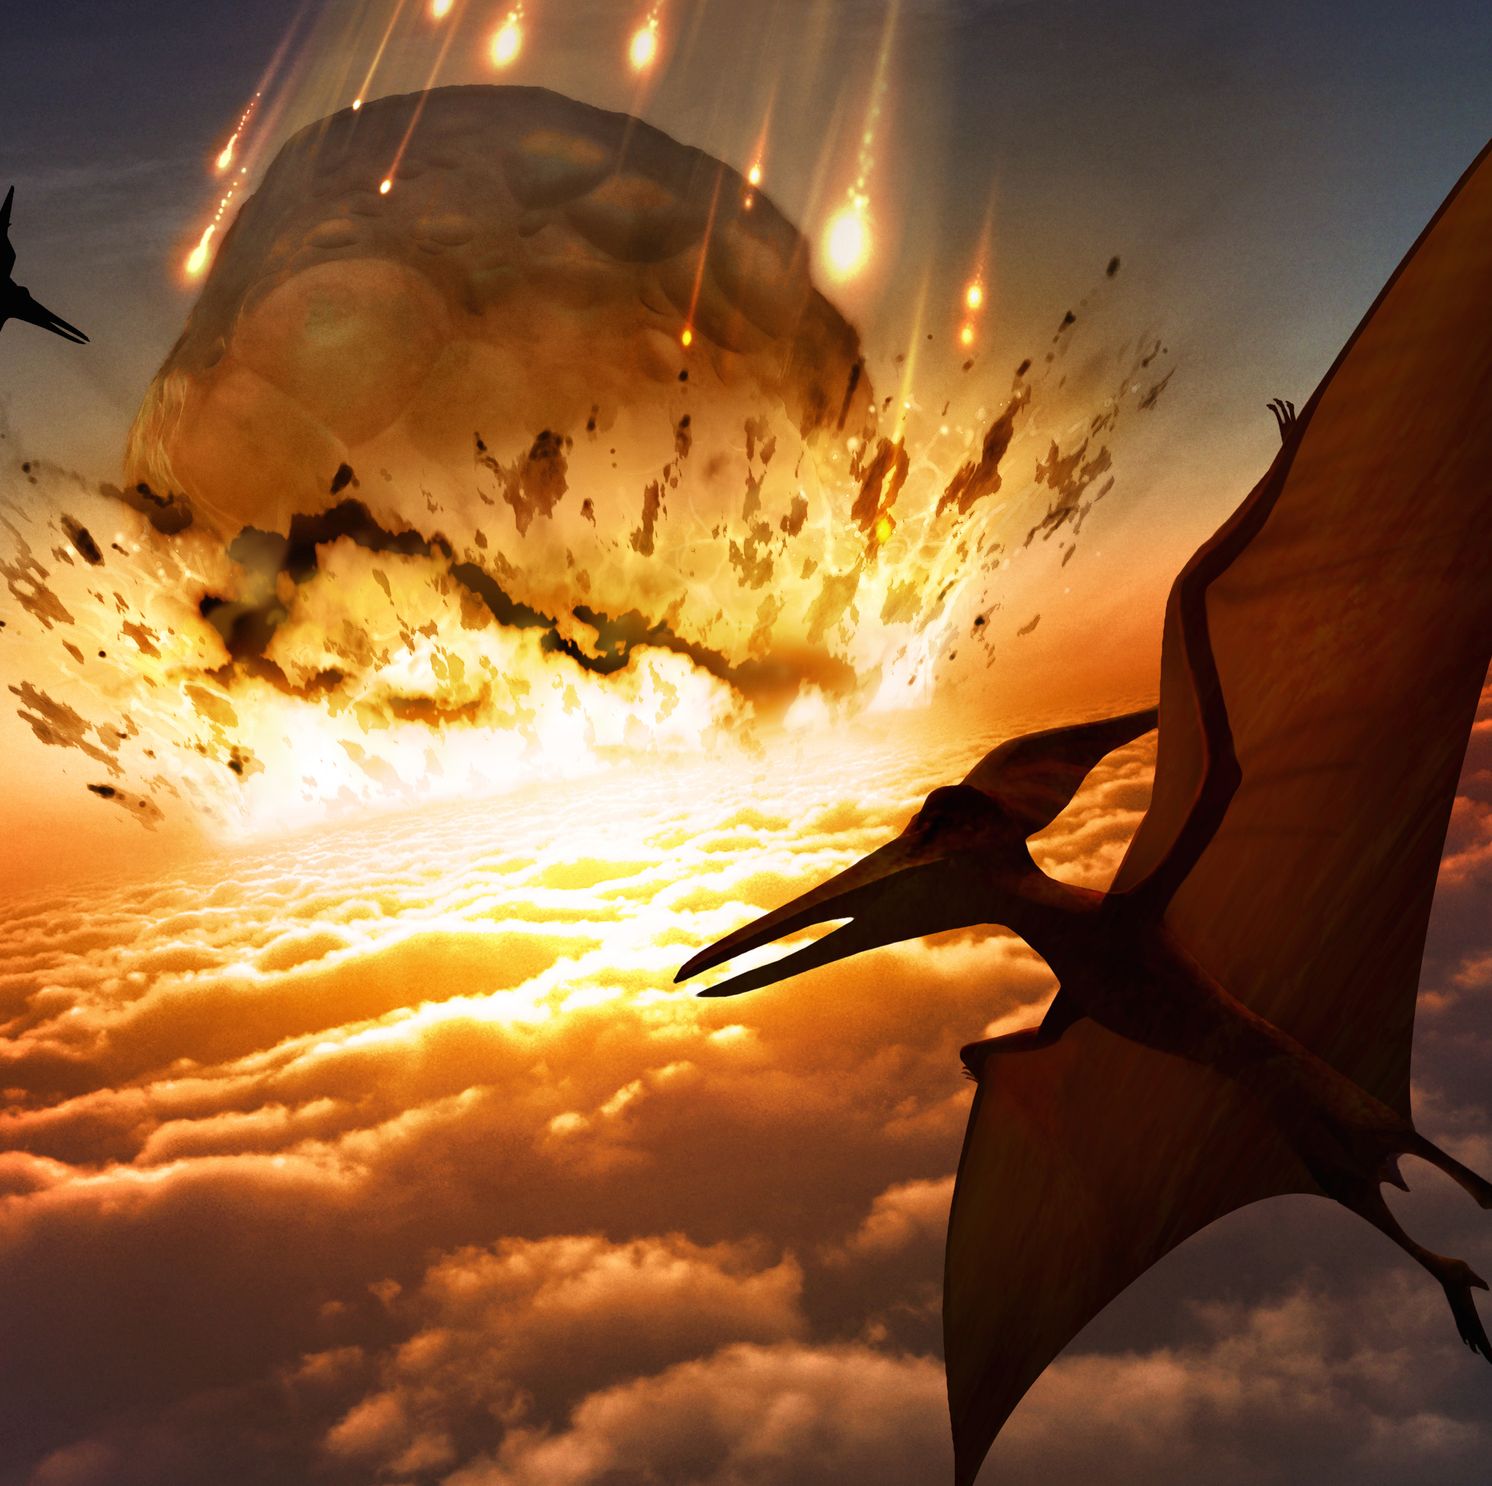 Not One Asteroid, But TWO, May Have Killed Off the Dinosaurs, Scientists Say